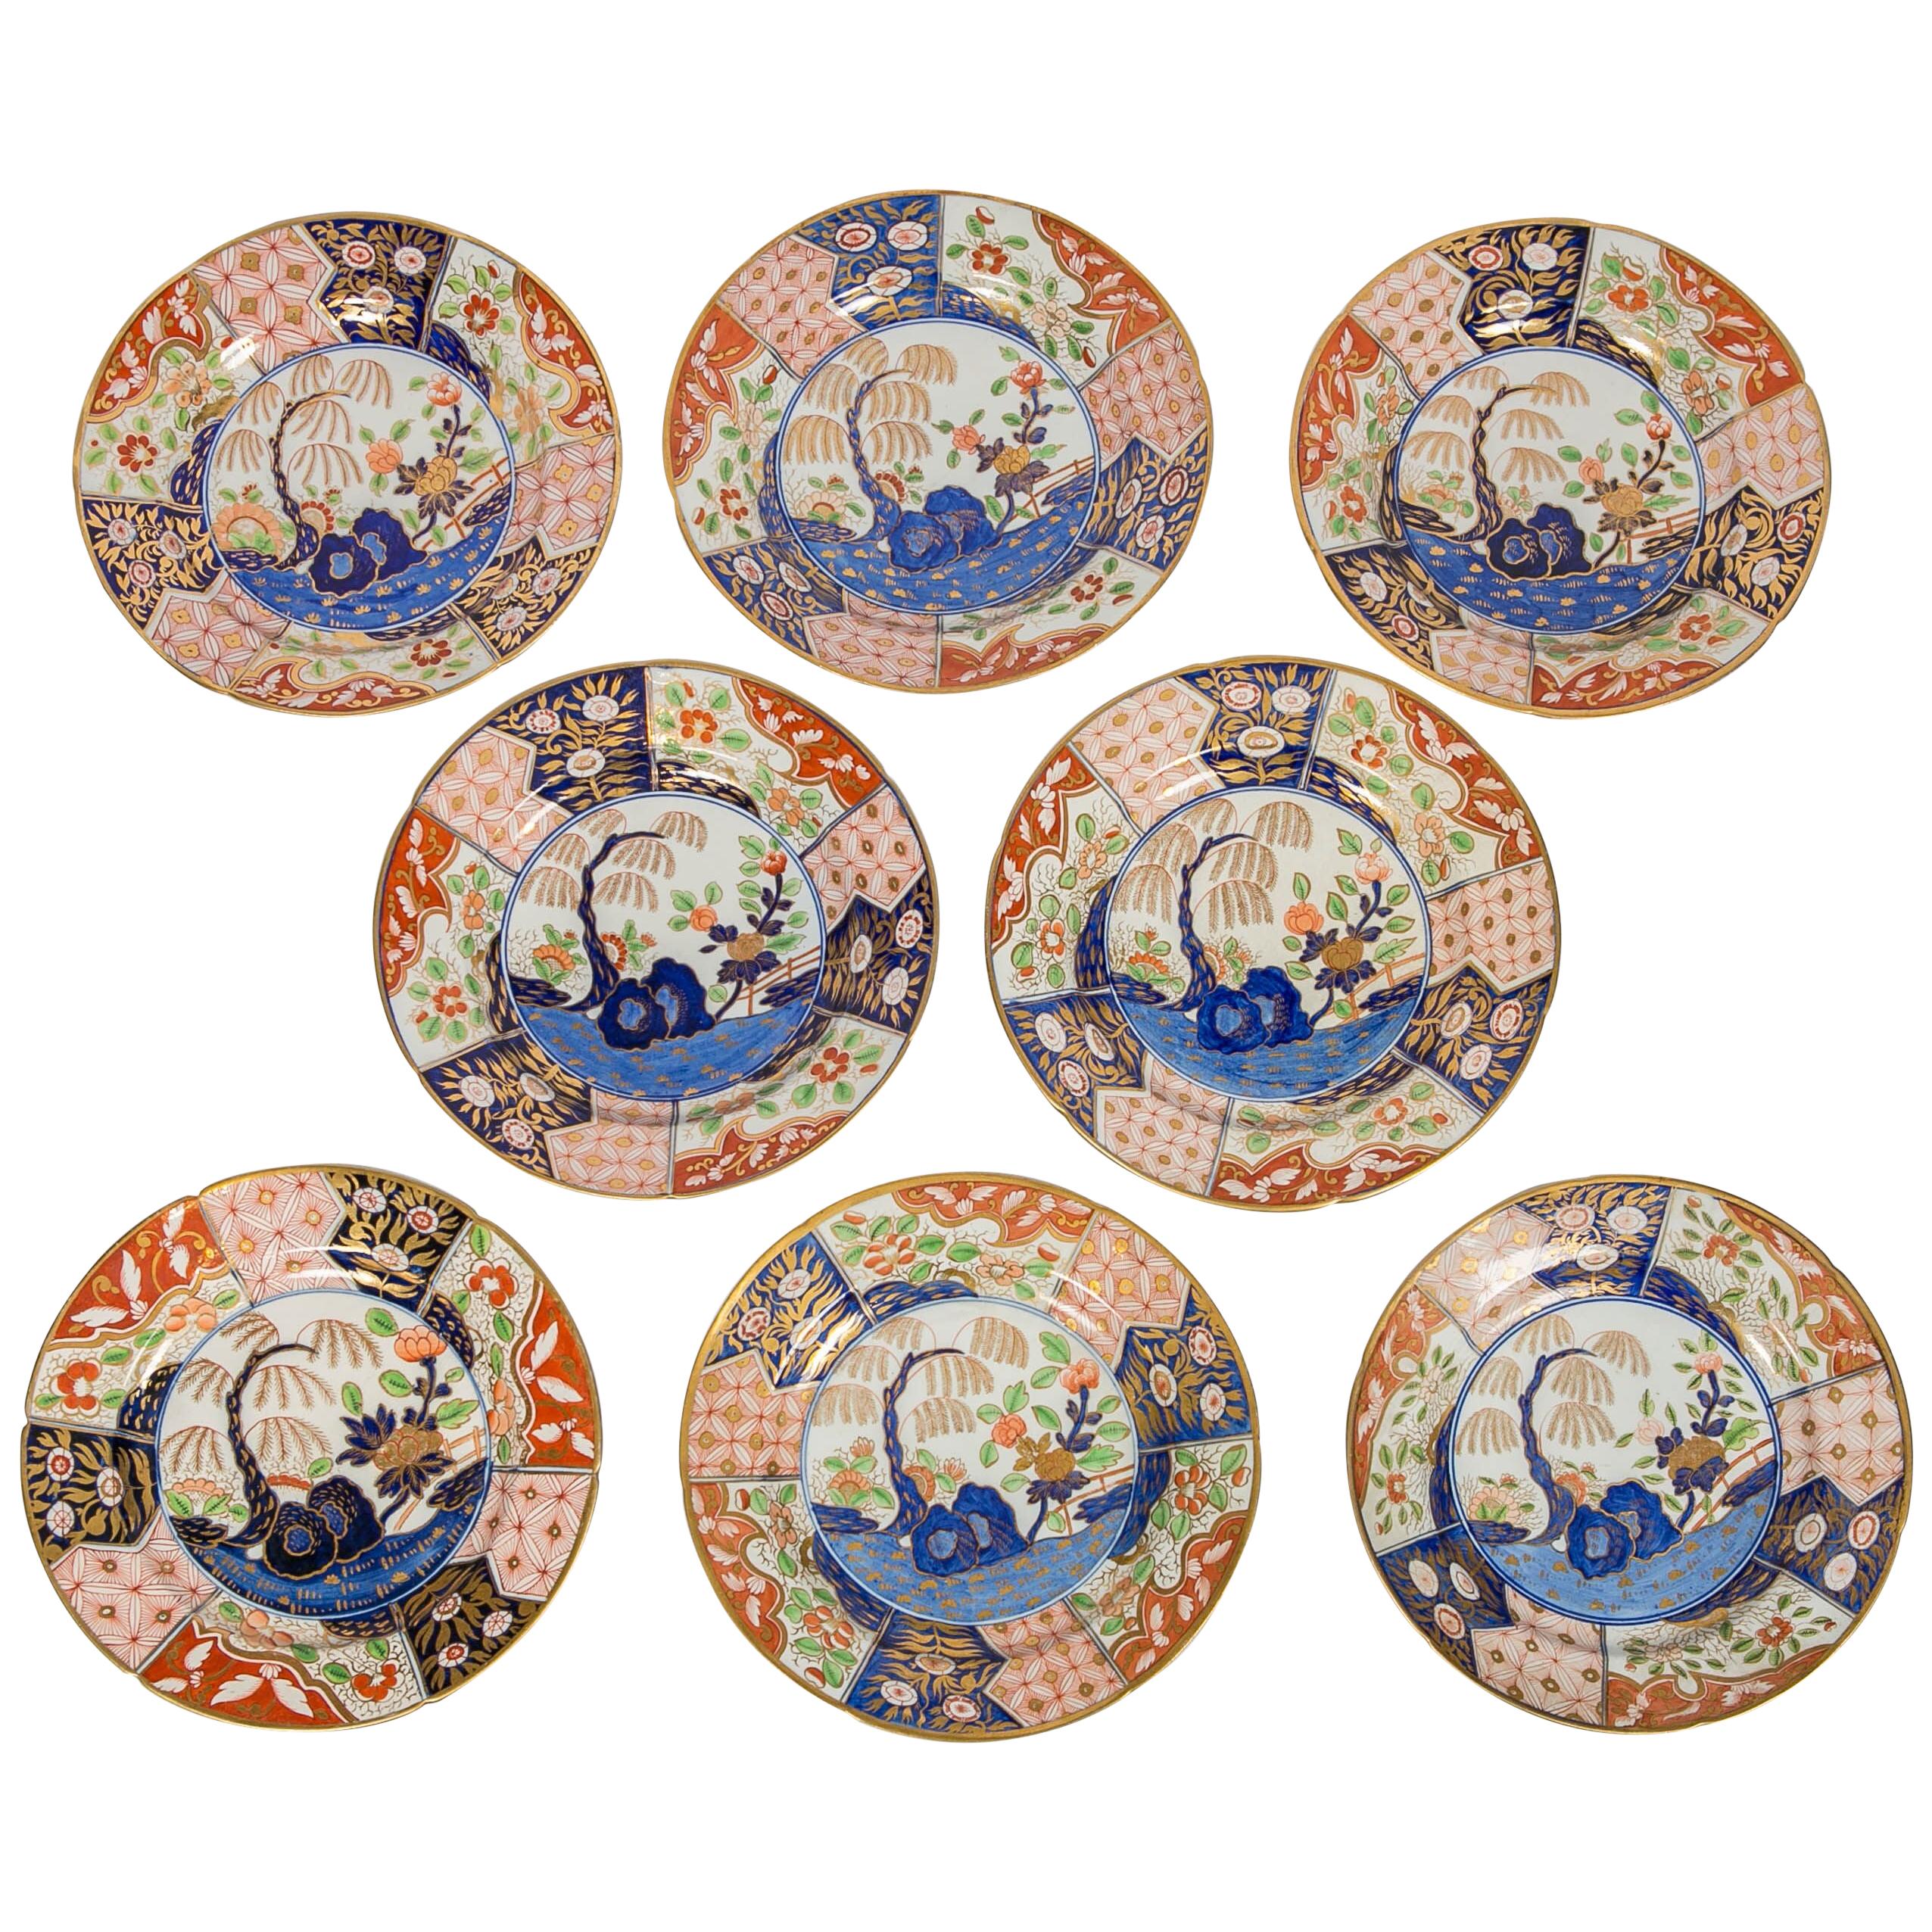 Set of Rock and Tree Pattern Dinner Plates Made in England, circa 1820